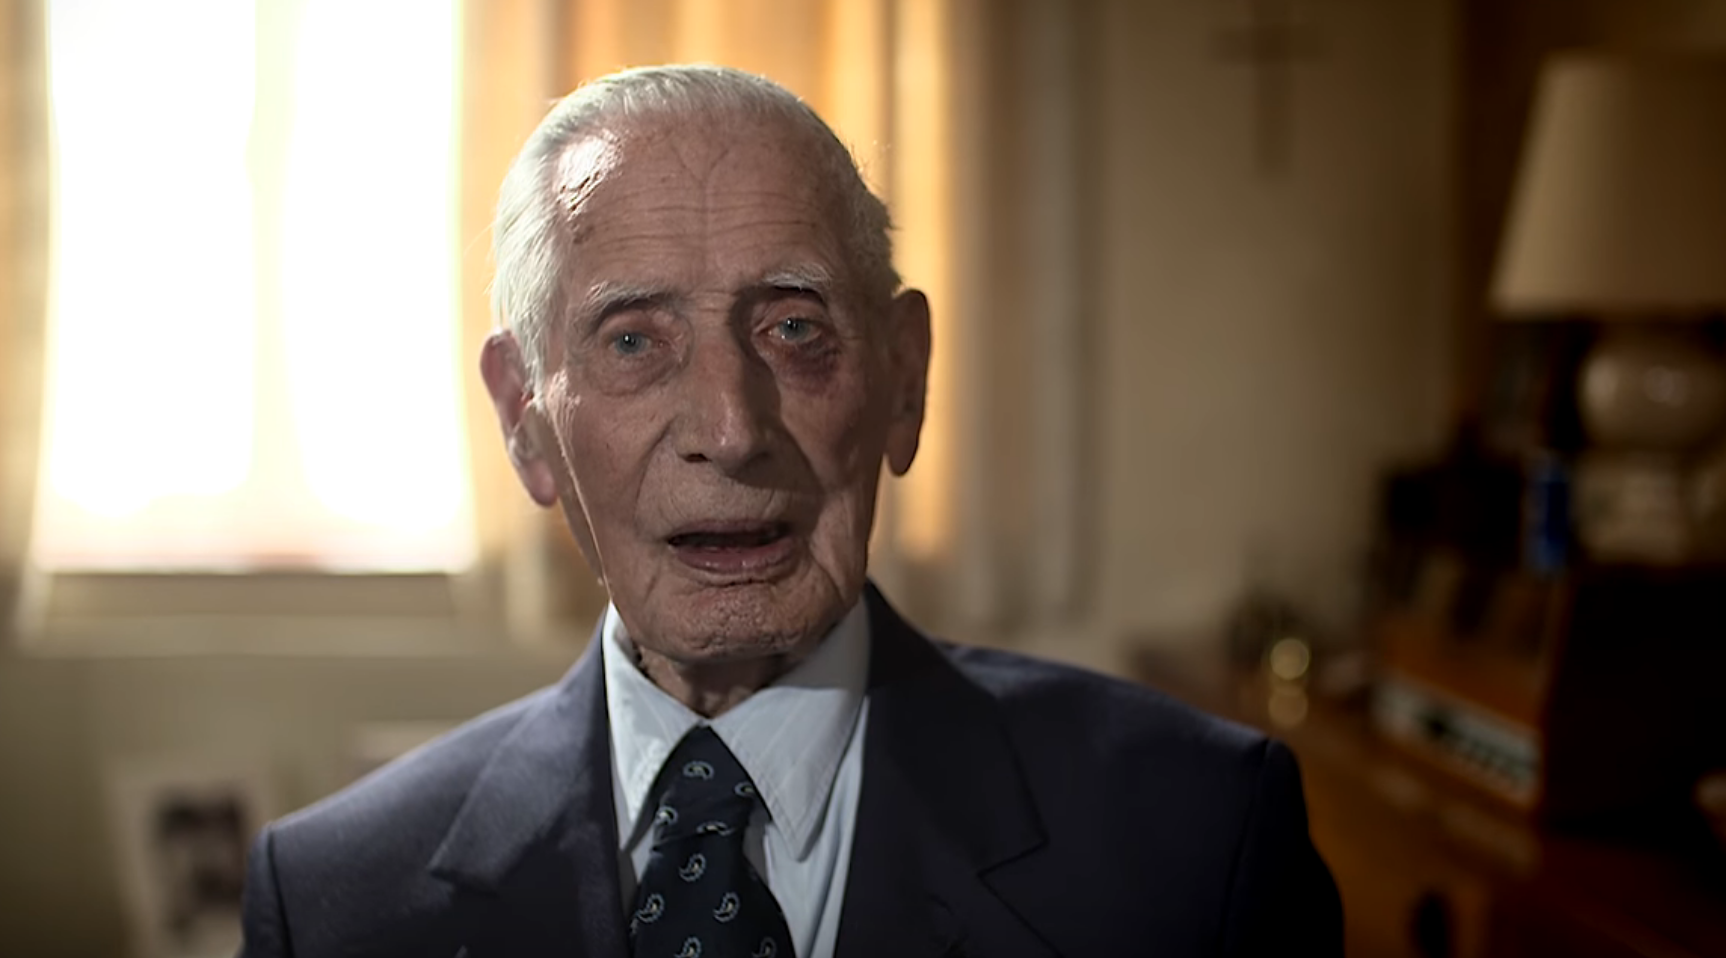 From Dunkirk To D-Day: The Incredible Story Of This WW2 Veteran Alfred Thomas Smith